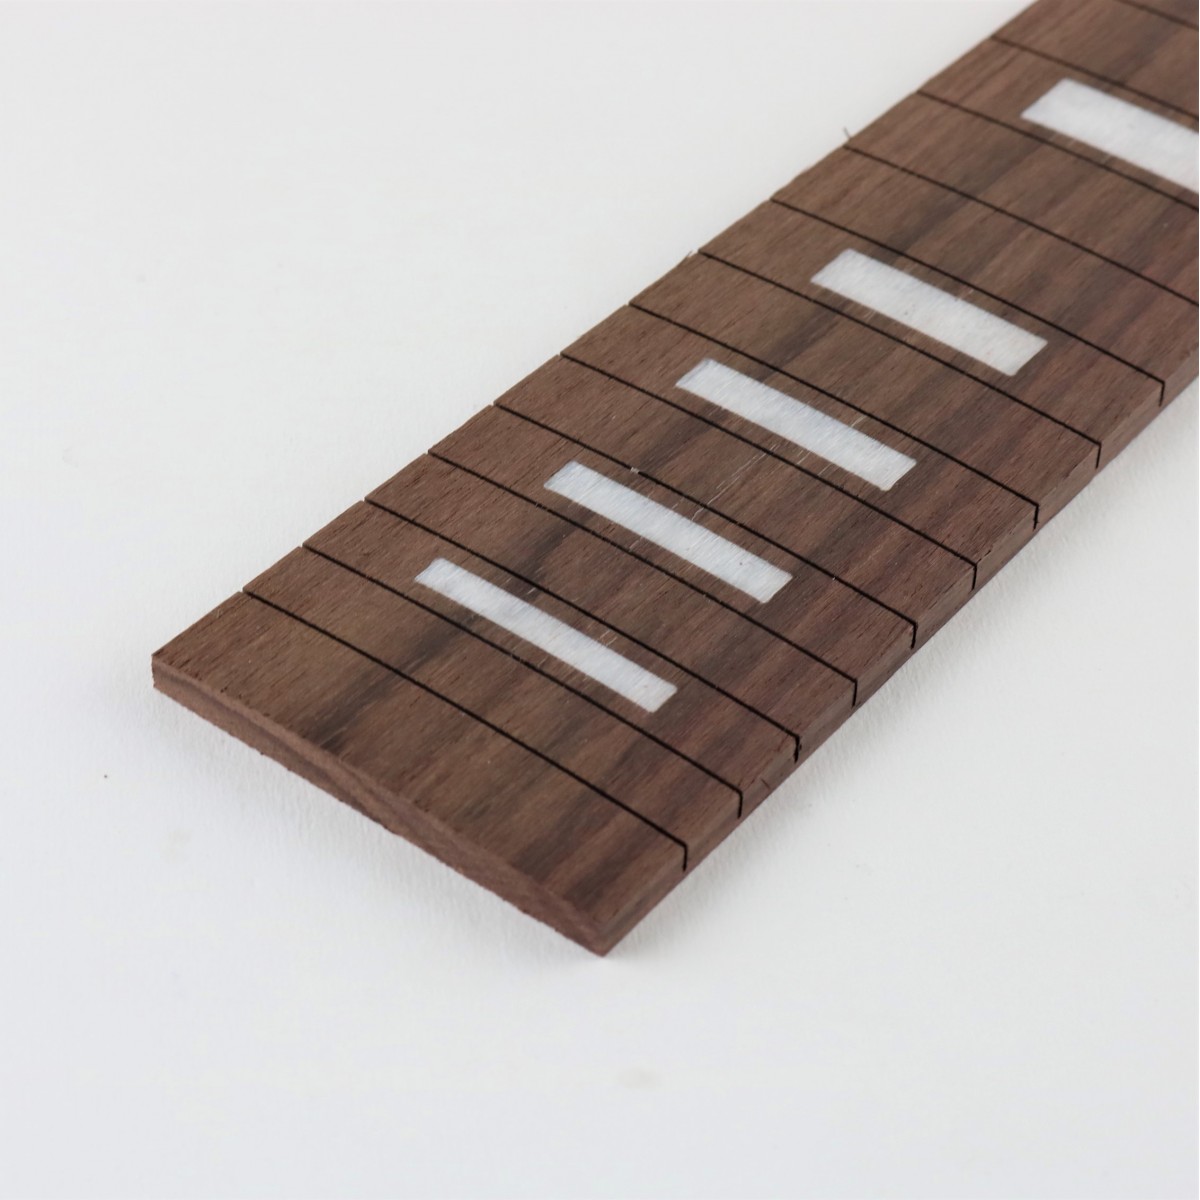 FINGERBOARD ROSEWOOD SLOTTED 62.9CM SCALE W/BLOCK INLAYS